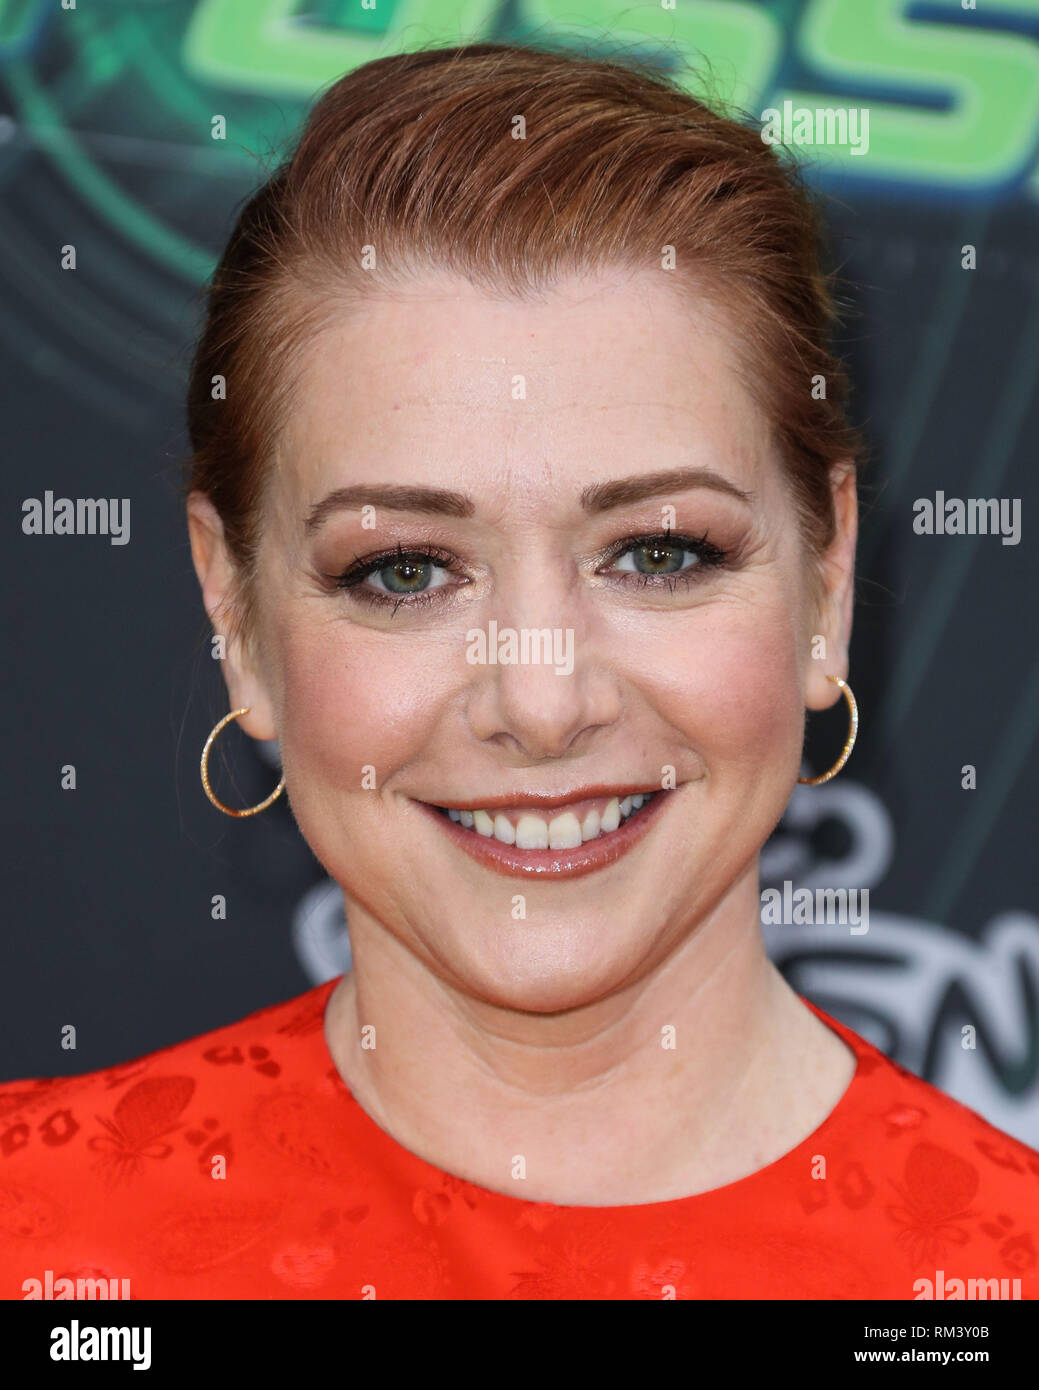 Los Angeles, North Hollywood, United States. 12th Feb, 2019. NORTH HOLLYWOOD, LOS ANGELES, CA, USA - FEBRUARY 12: Actress Alyson Hannigan arrives at the Los Angeles Premiere Of Disney Channel's 'Kim Possible' held at the Saban Media Center at the Television Academy on February 12, 2019 in North Hollywood, Los Angeles, California, United States. (Photo by Xavier Collin/Image Press Agency) Credit: Image Press Agency/Alamy Live News Stock Photo